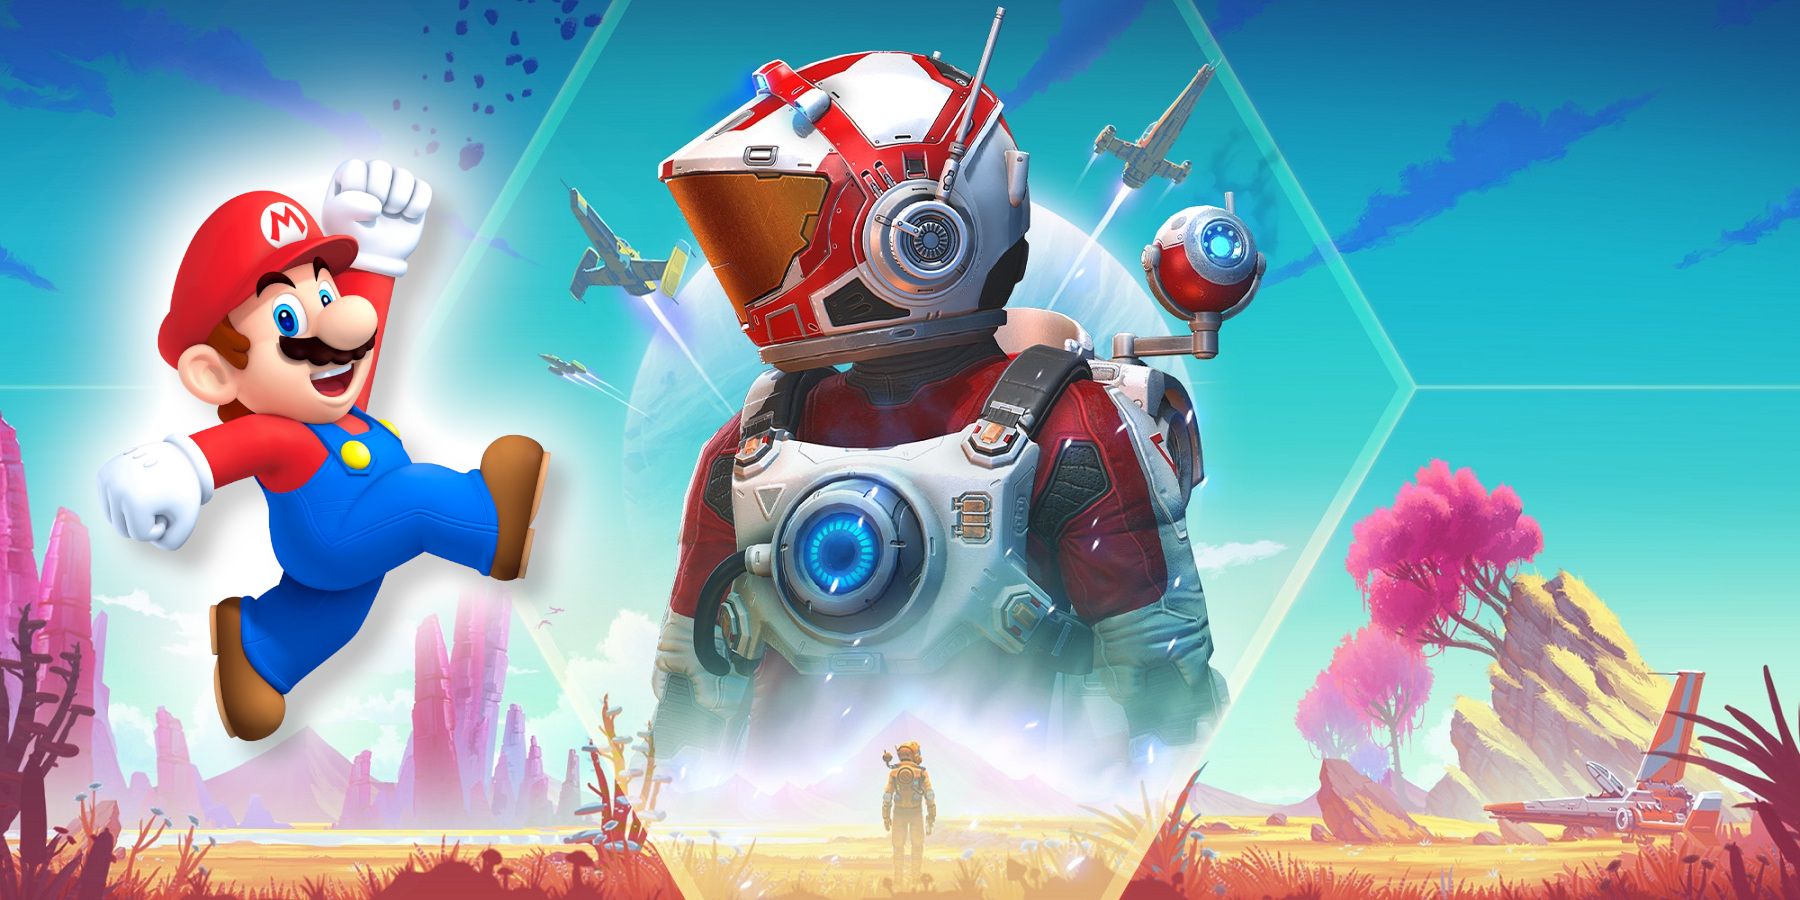 Image from No Man's Sky showing the Traveler in the middle looking at a jumping Mario.